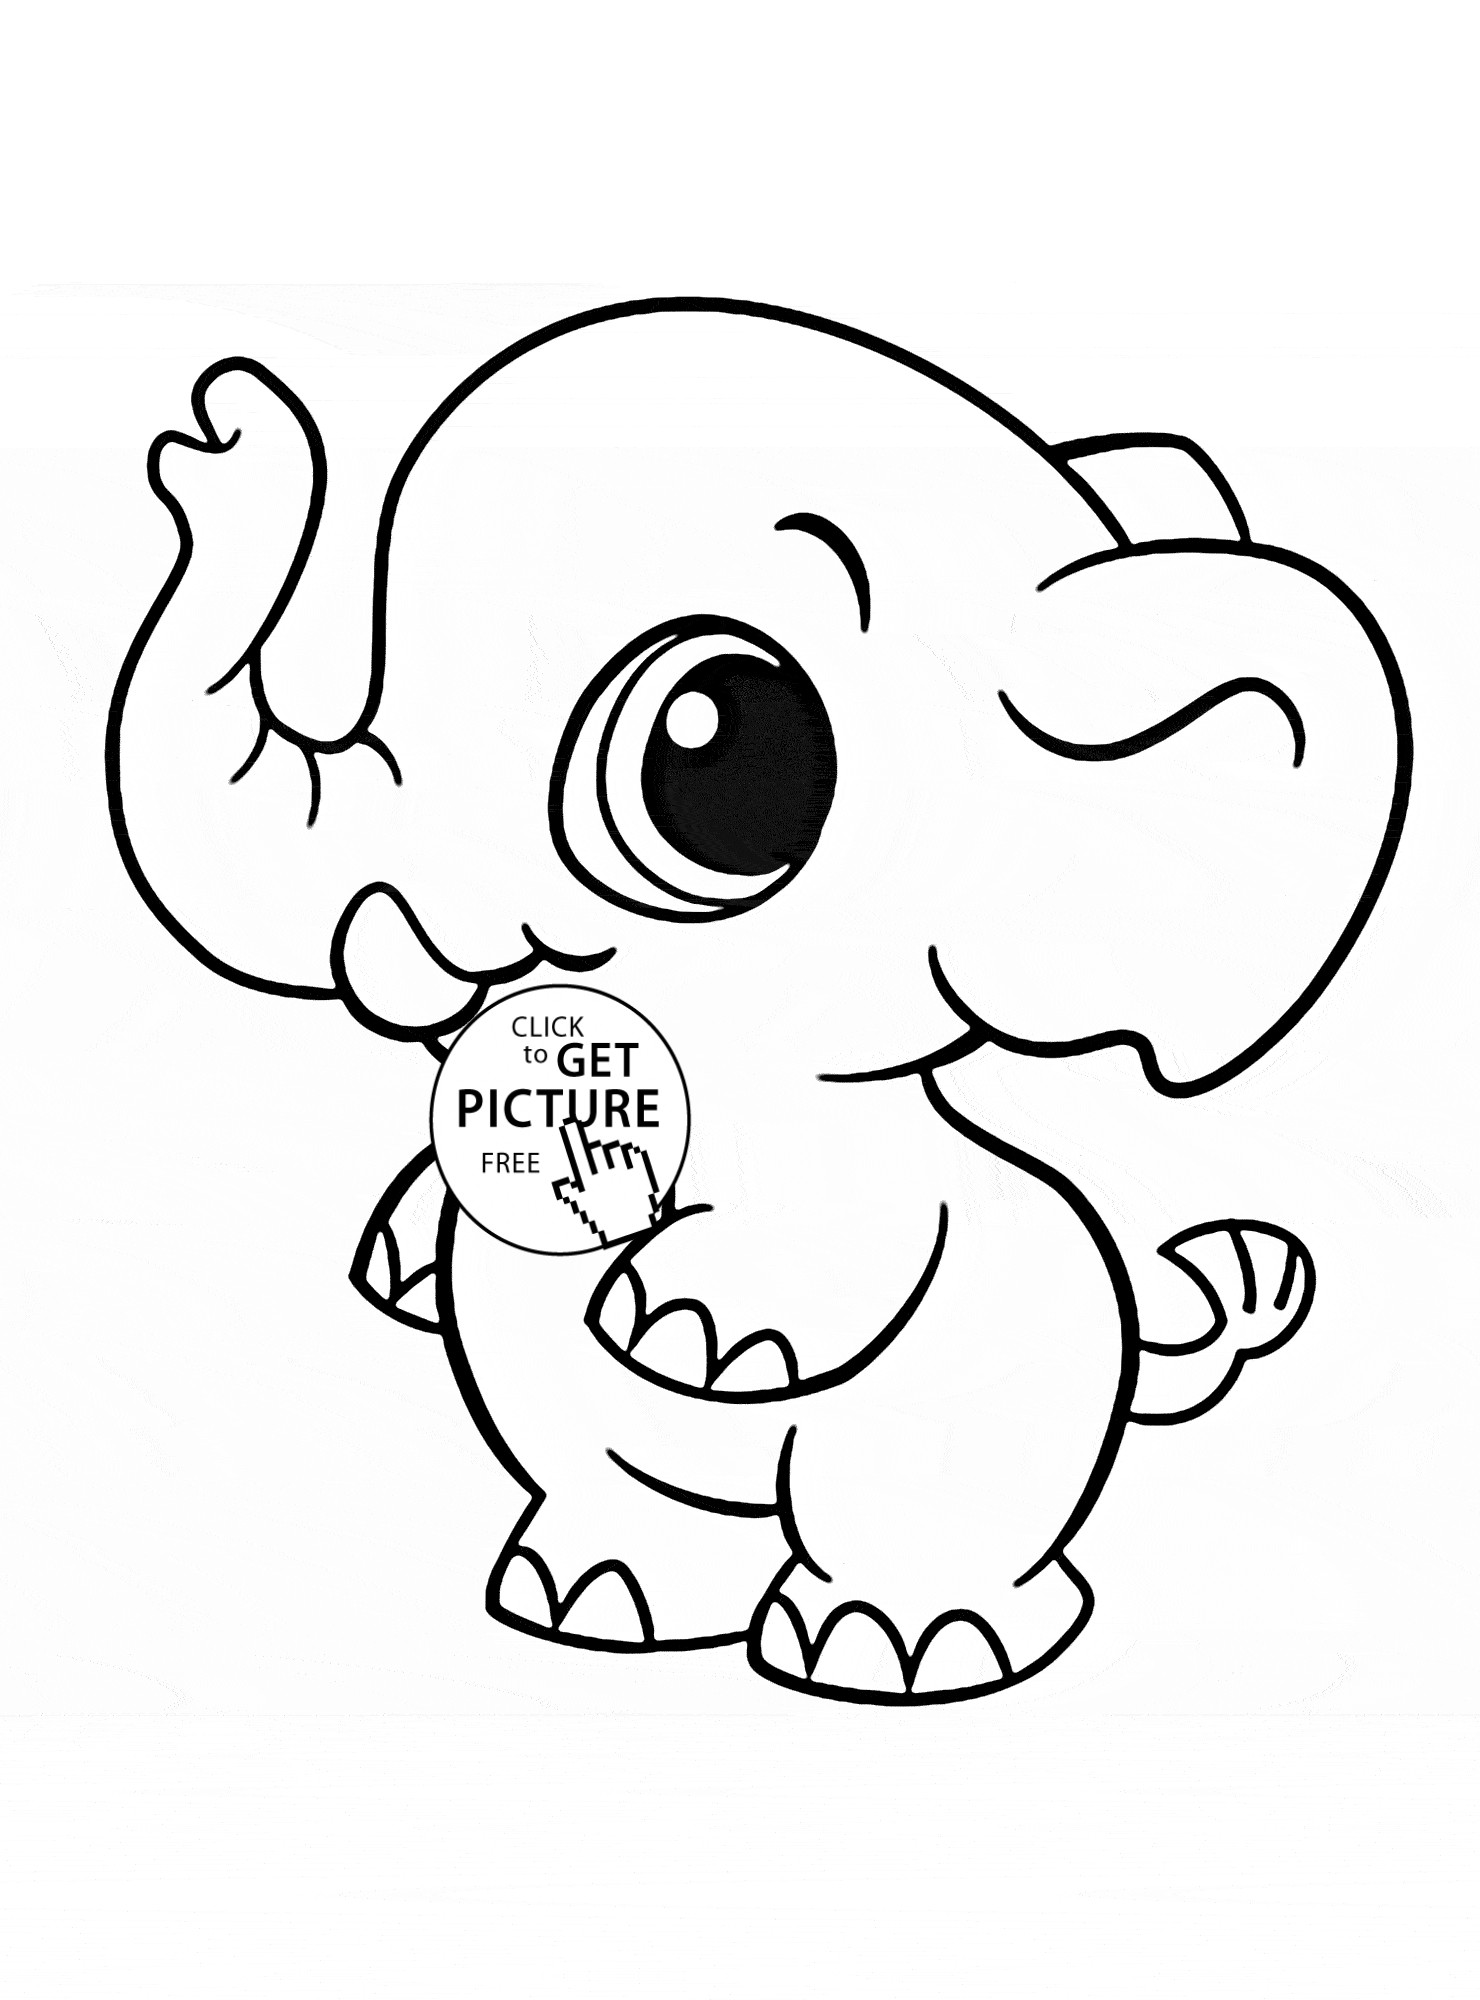 Cute Animals with Big Eyes Coloring Pages Wallpaper